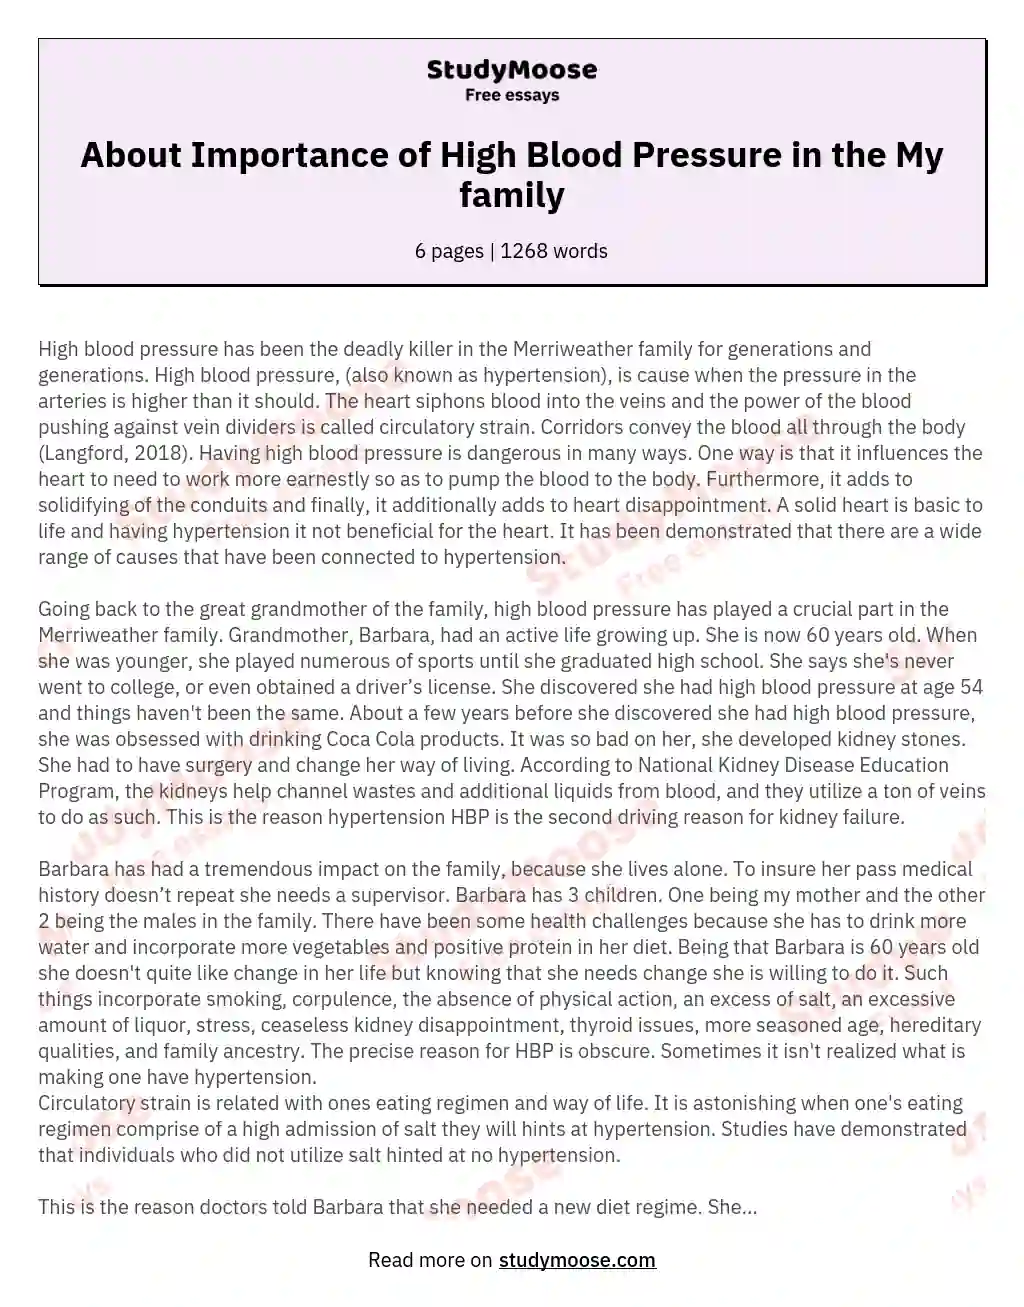 About Importance of High Blood Pressure in the My family essay